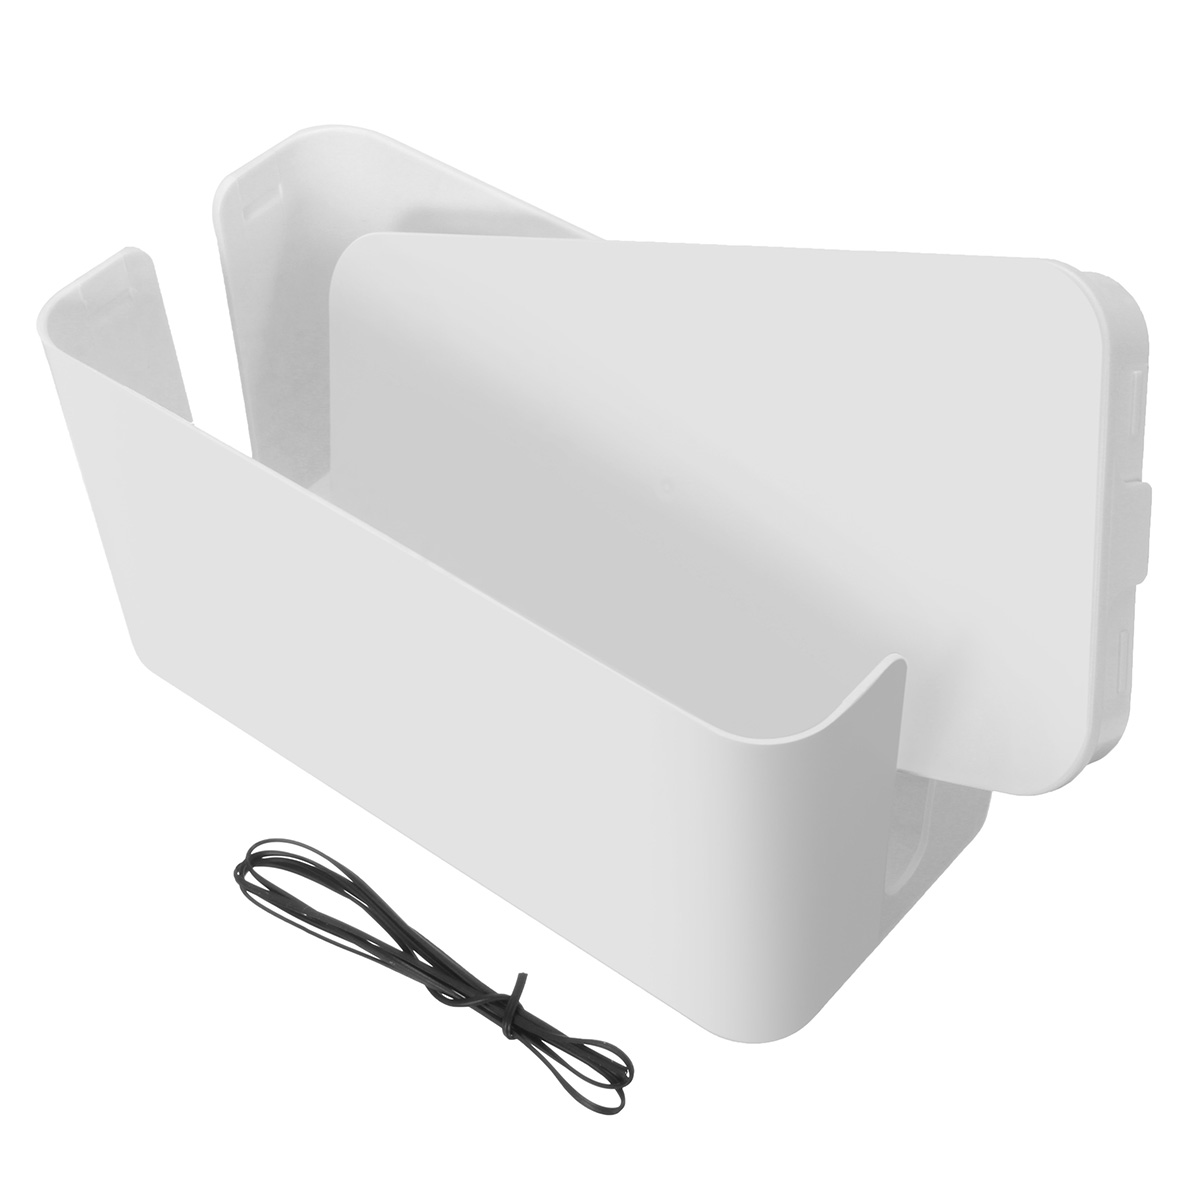 Cable Tidy Storage Box